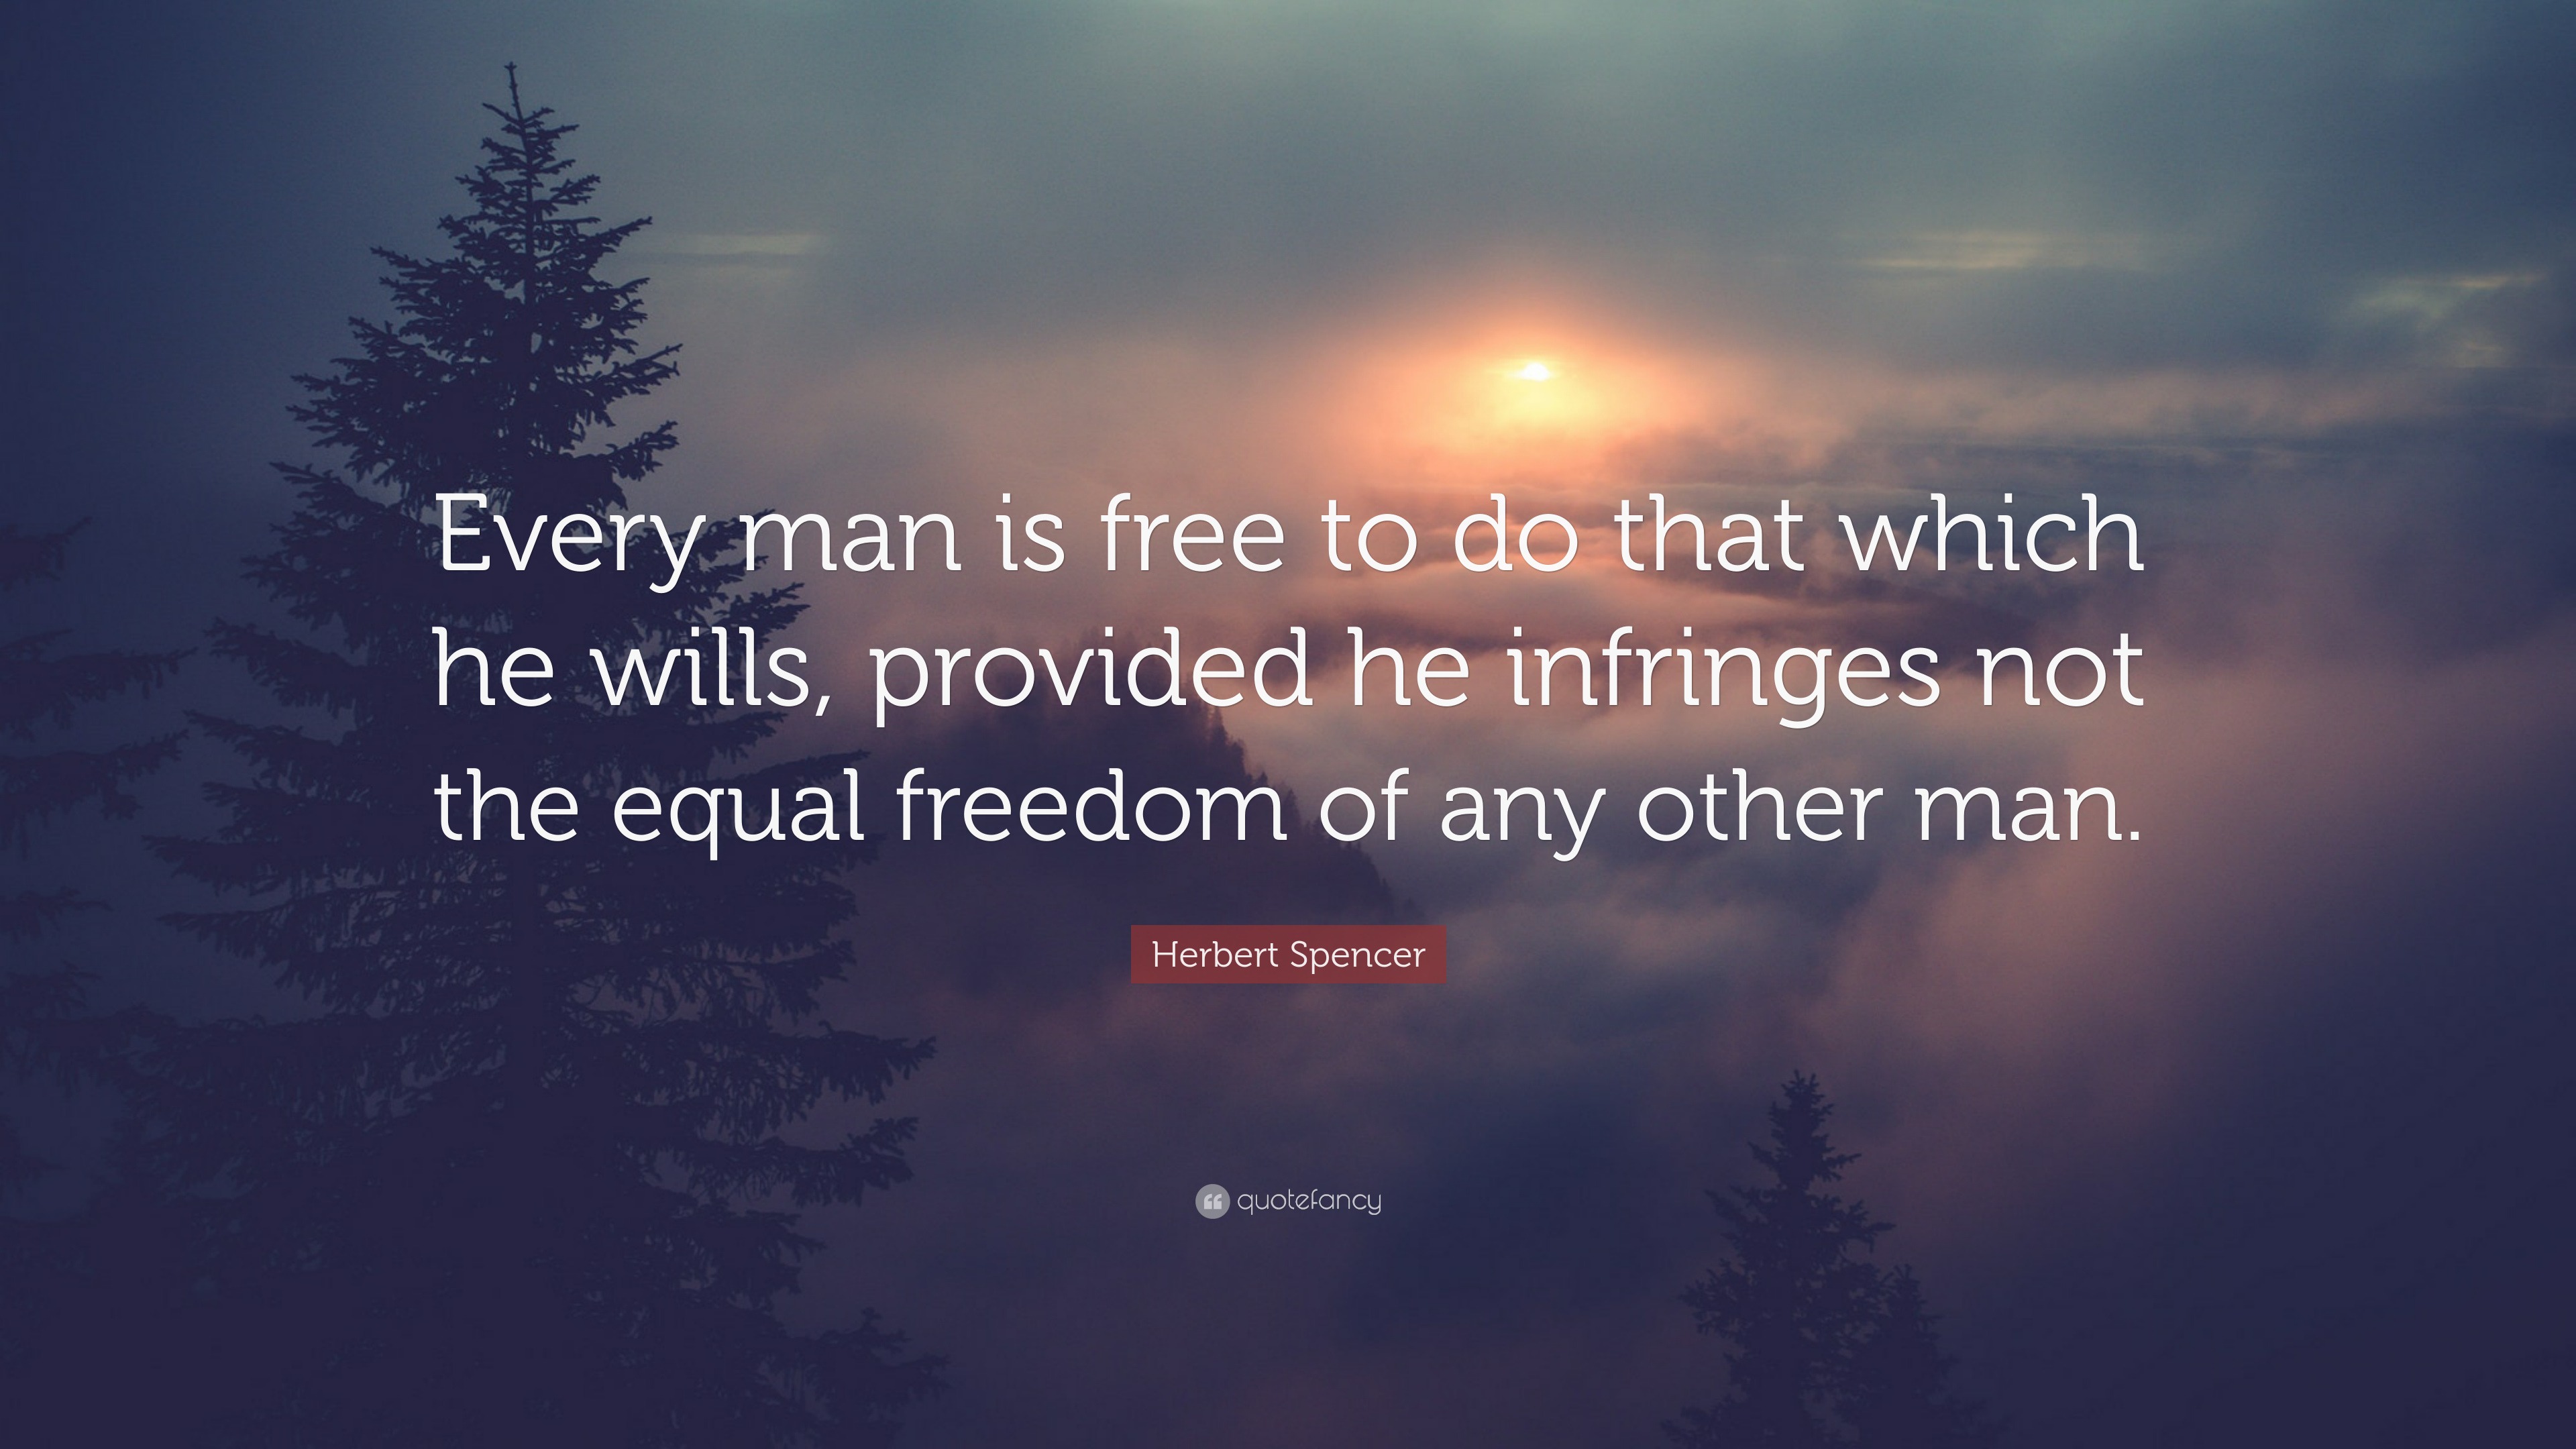 Herbert Spencer Quote: “Every man is free to do that which he wills ...